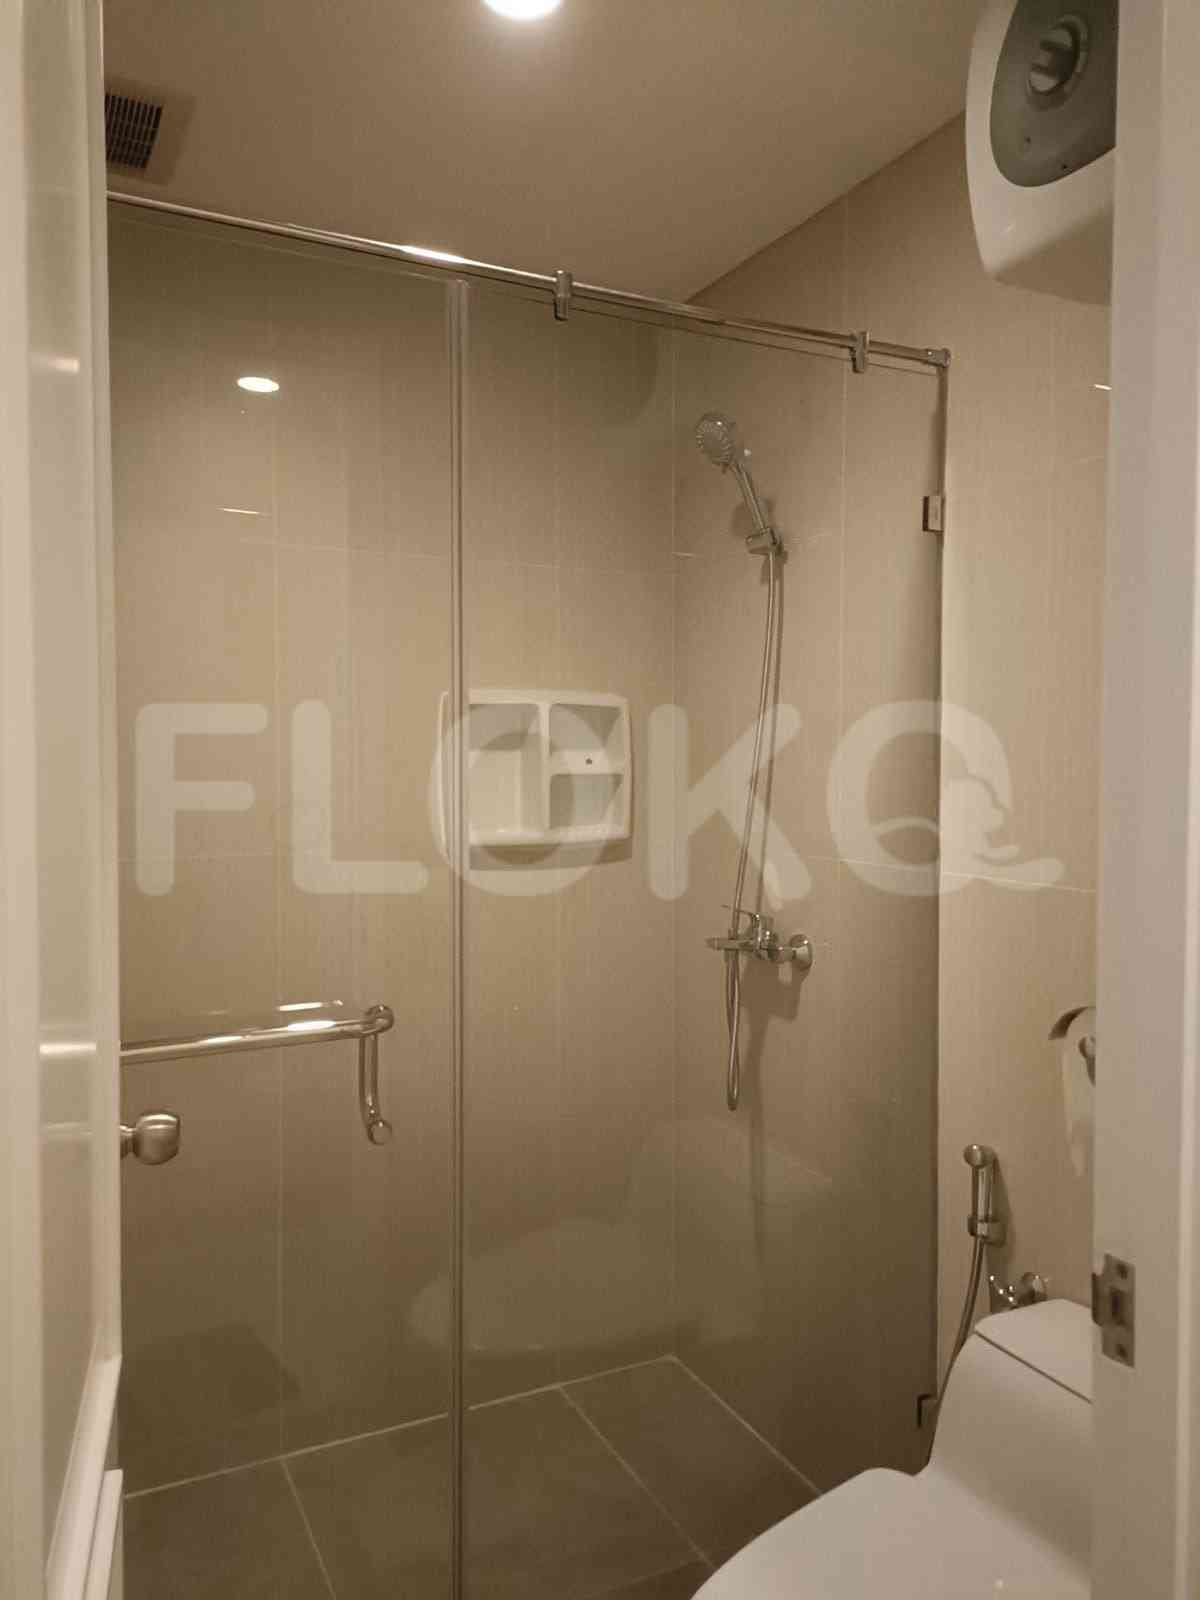 3 Bedroom on 39th Floor for Rent in Grand Mansion Apartment - fta41e 5